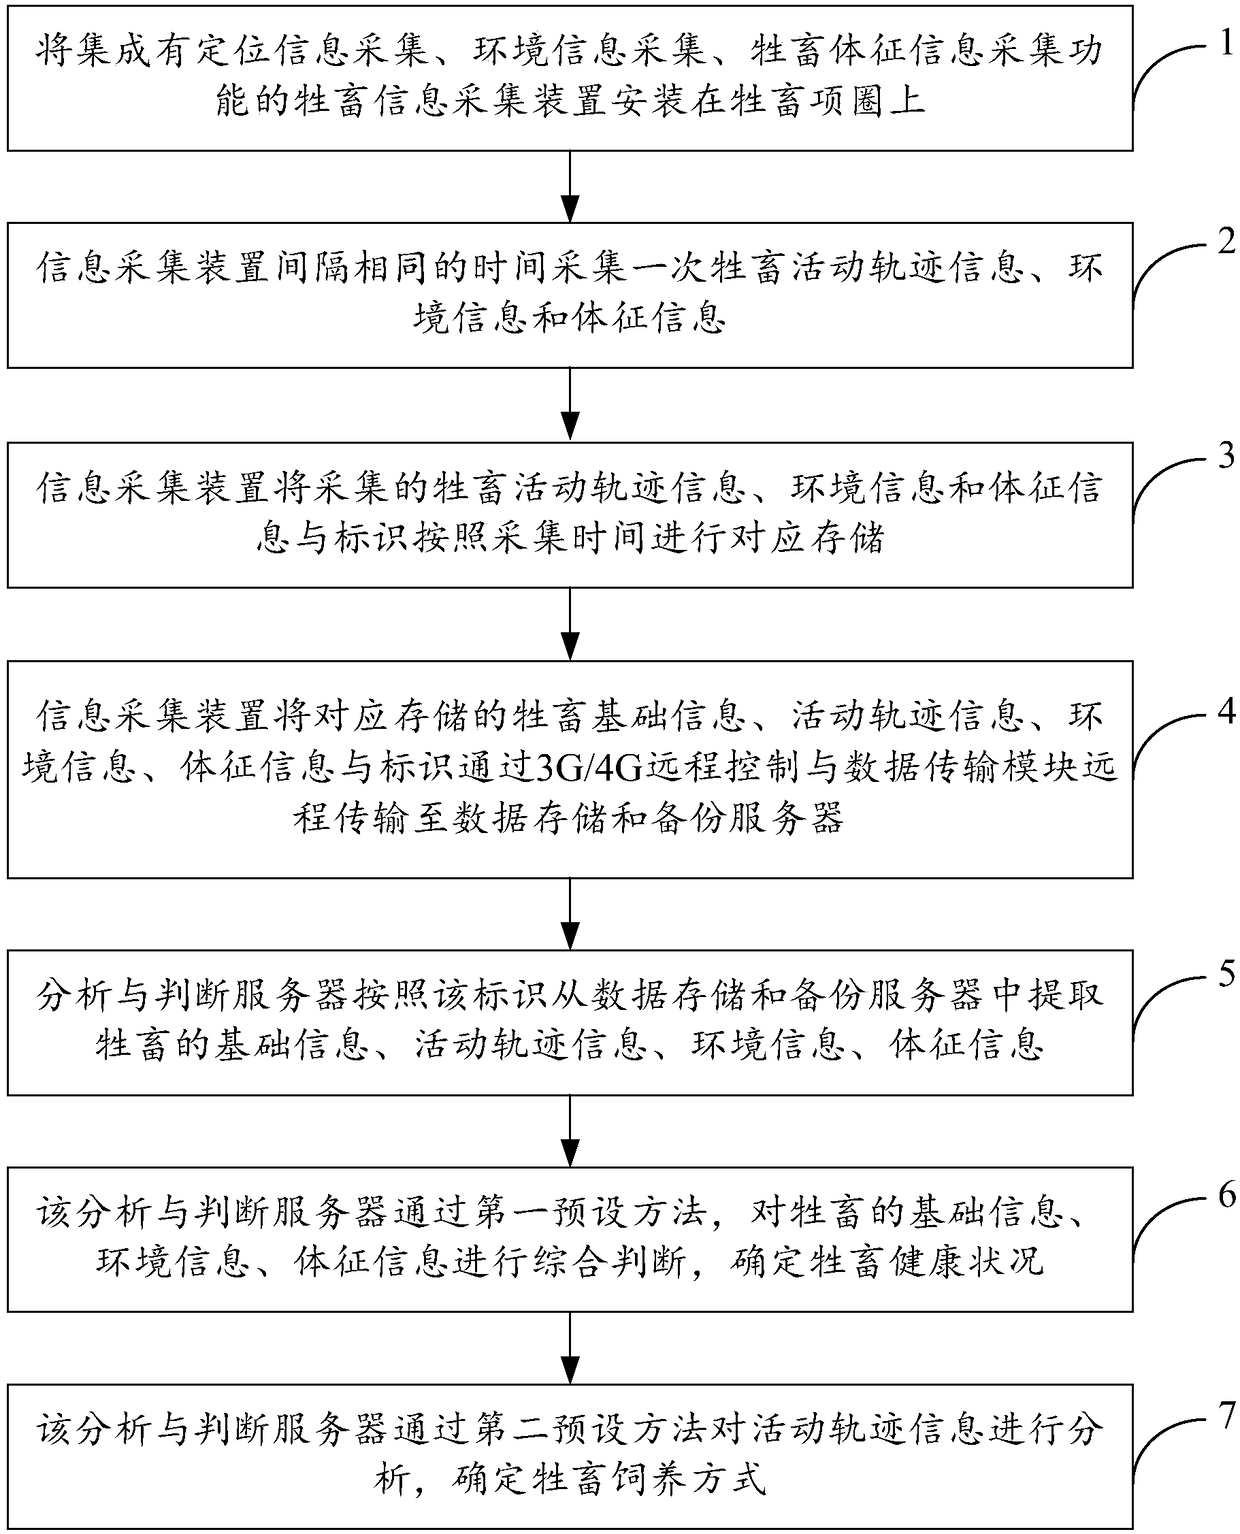 Source tracing method and system for grazing animal growth process